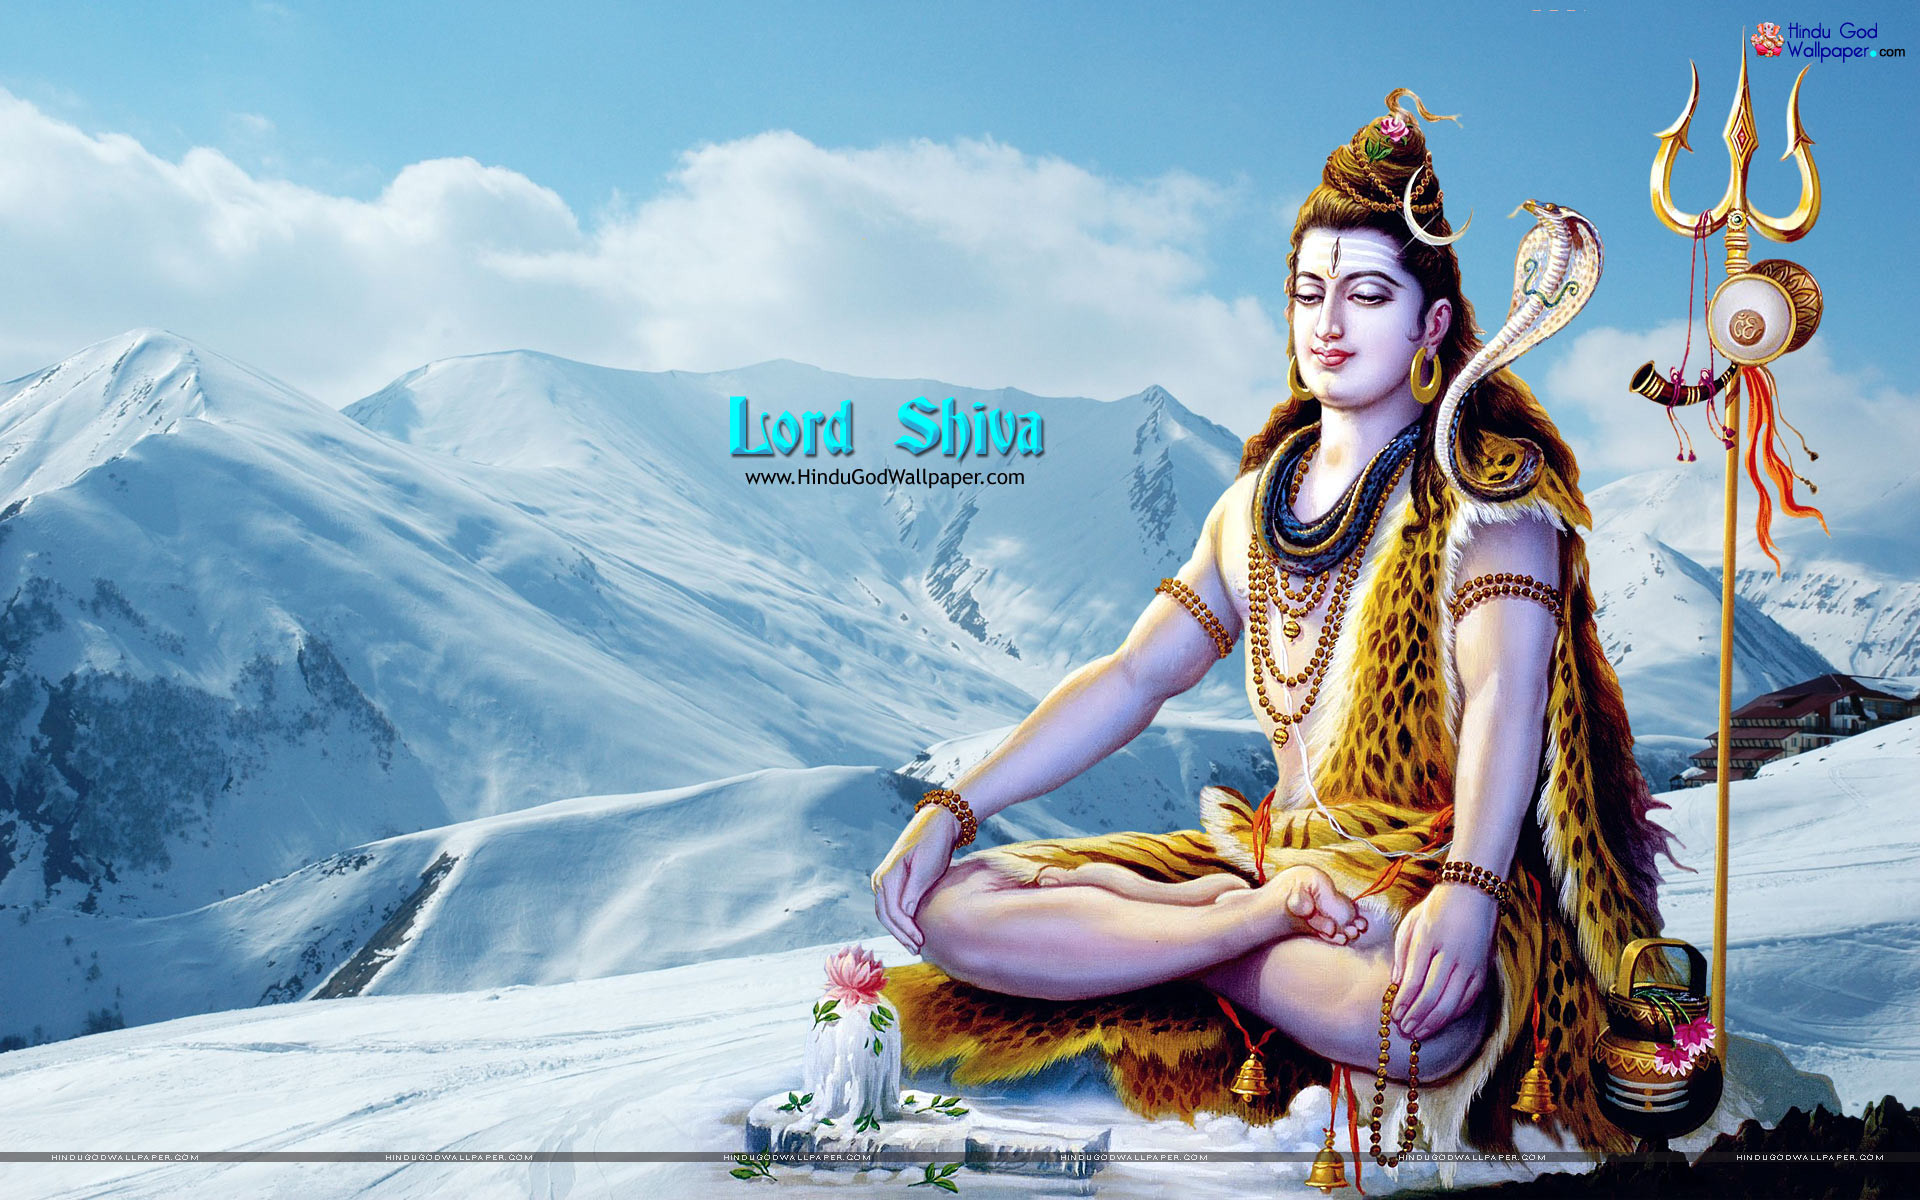 1920x1200 God Wallpapers: Lord Shiva Wallpapers, Pictures & Images Wallpaper .